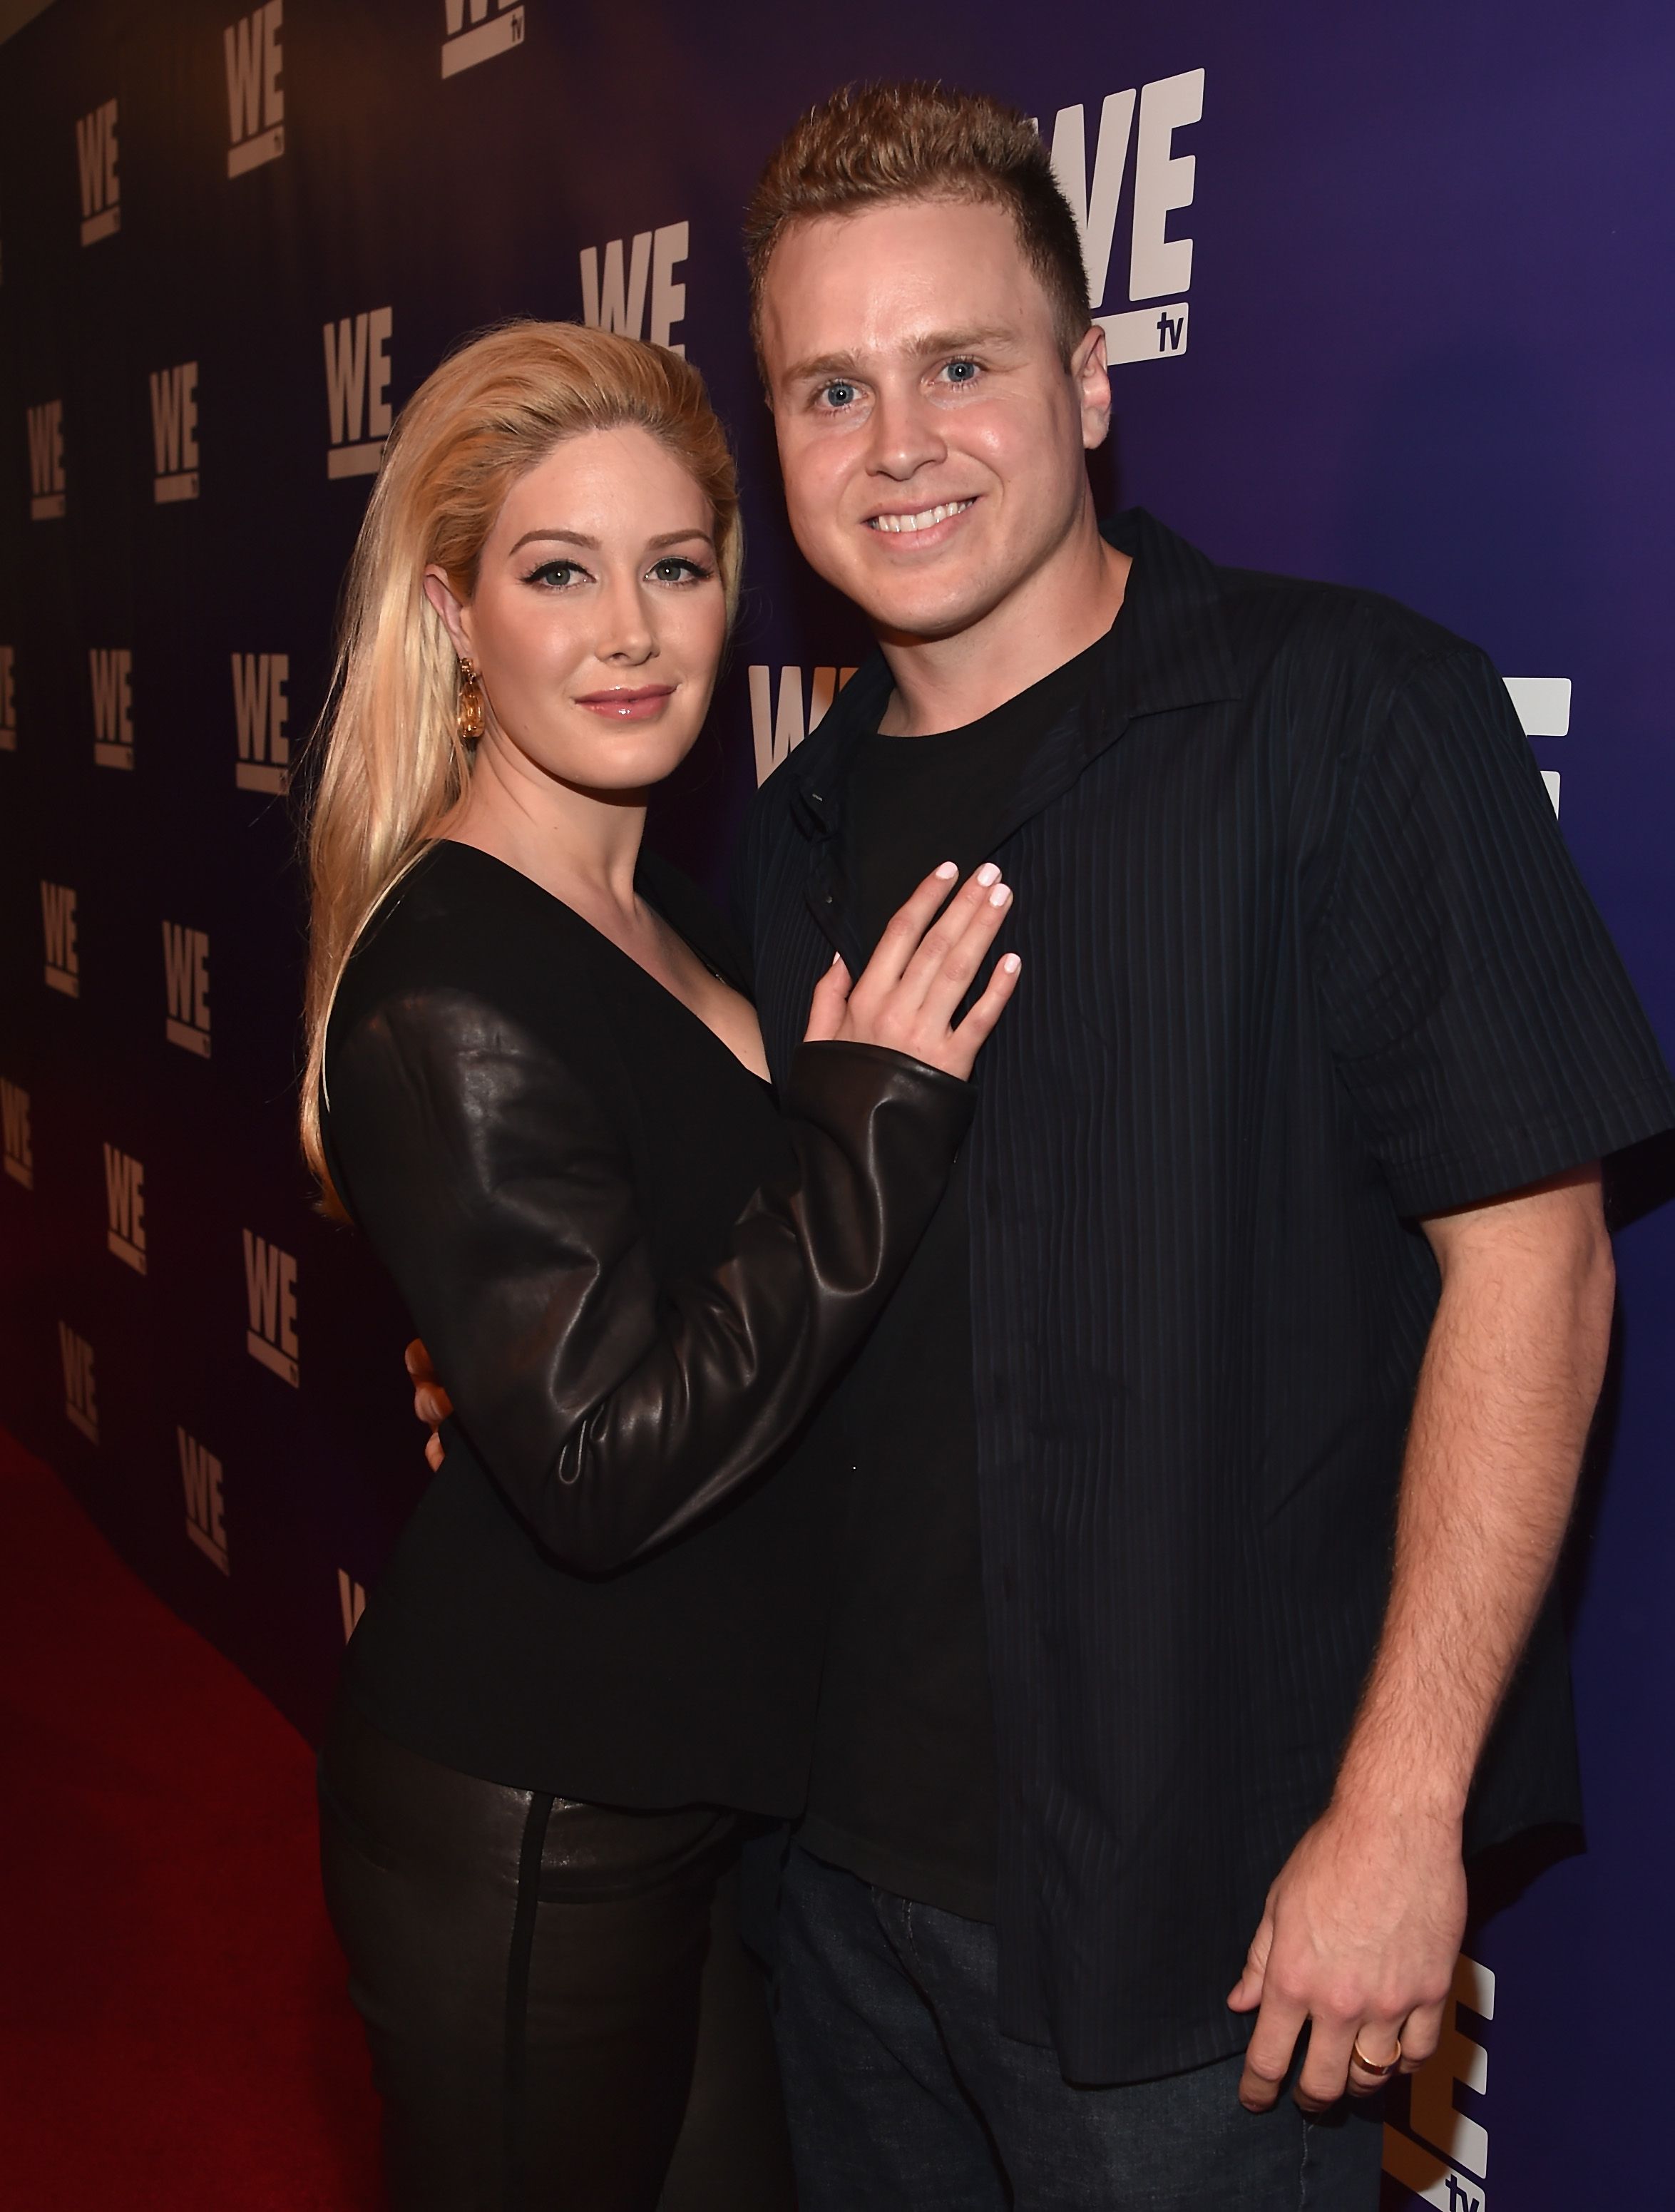 Spencer Pratt and Heidi Montag at the premier of "The Evolution of The Relationship Reality Show" in 2015 in Beverly Hills | Source: Getty Images